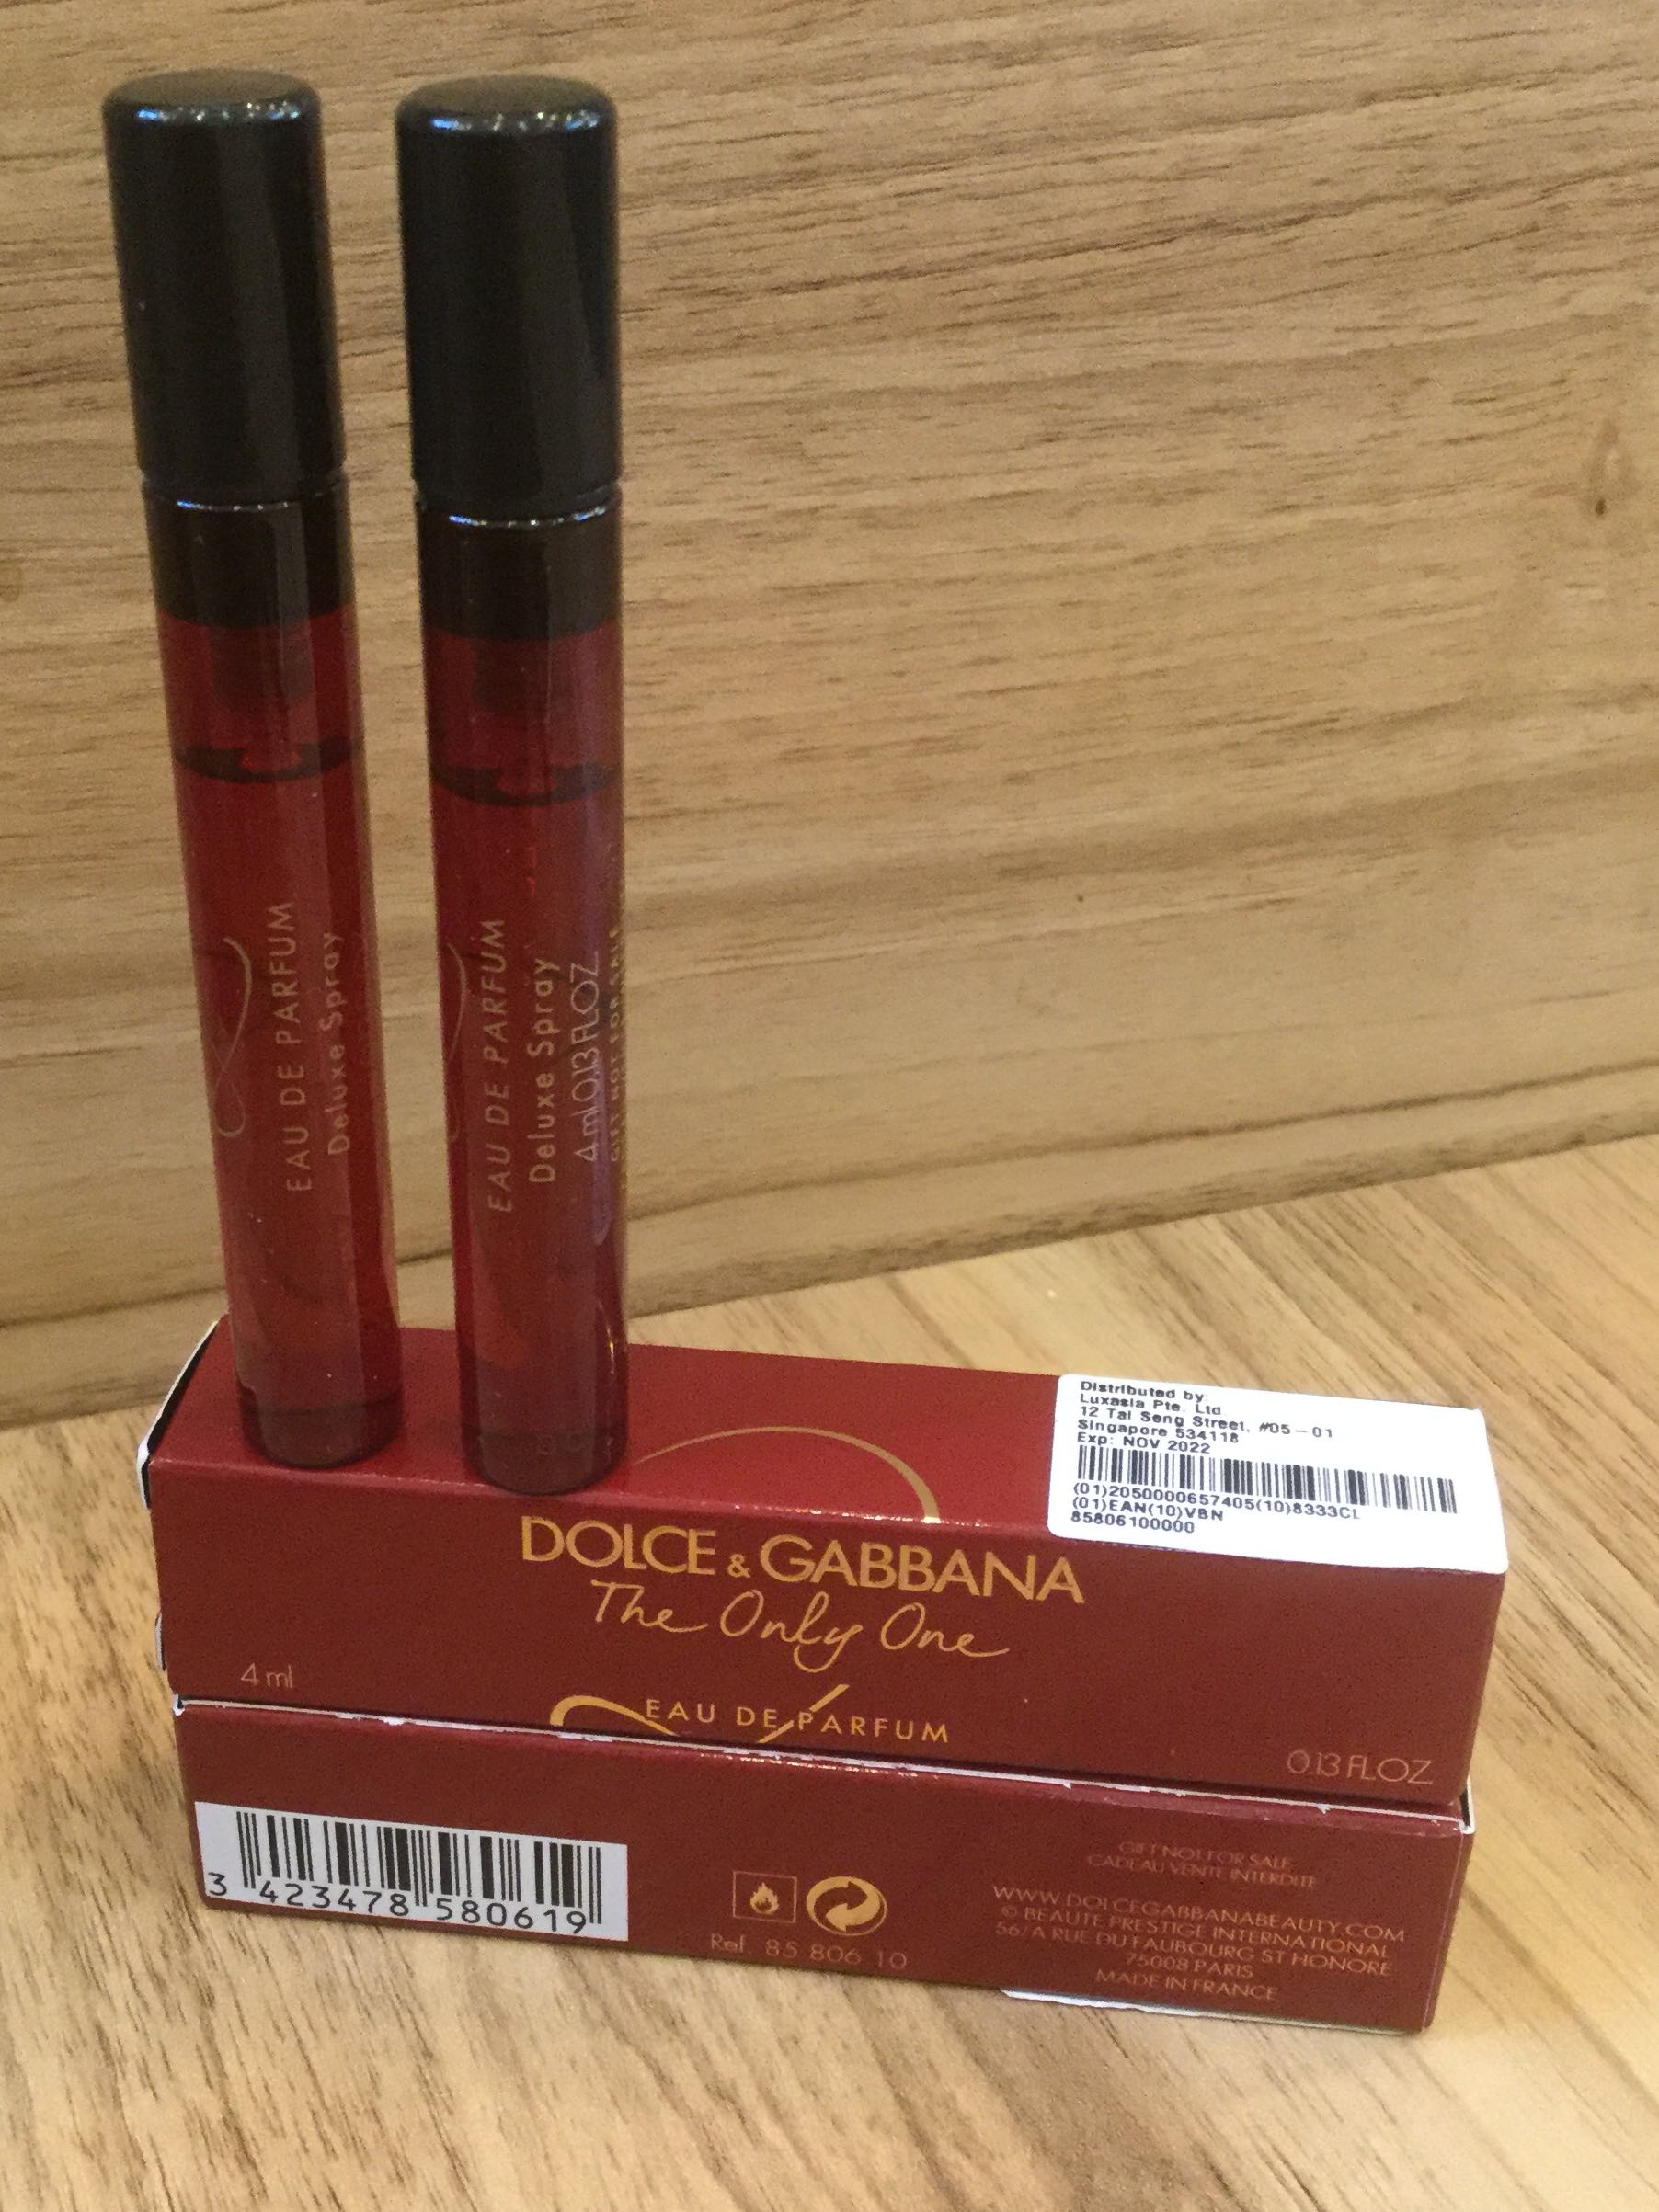 dolce and gabbana the only one 2 review